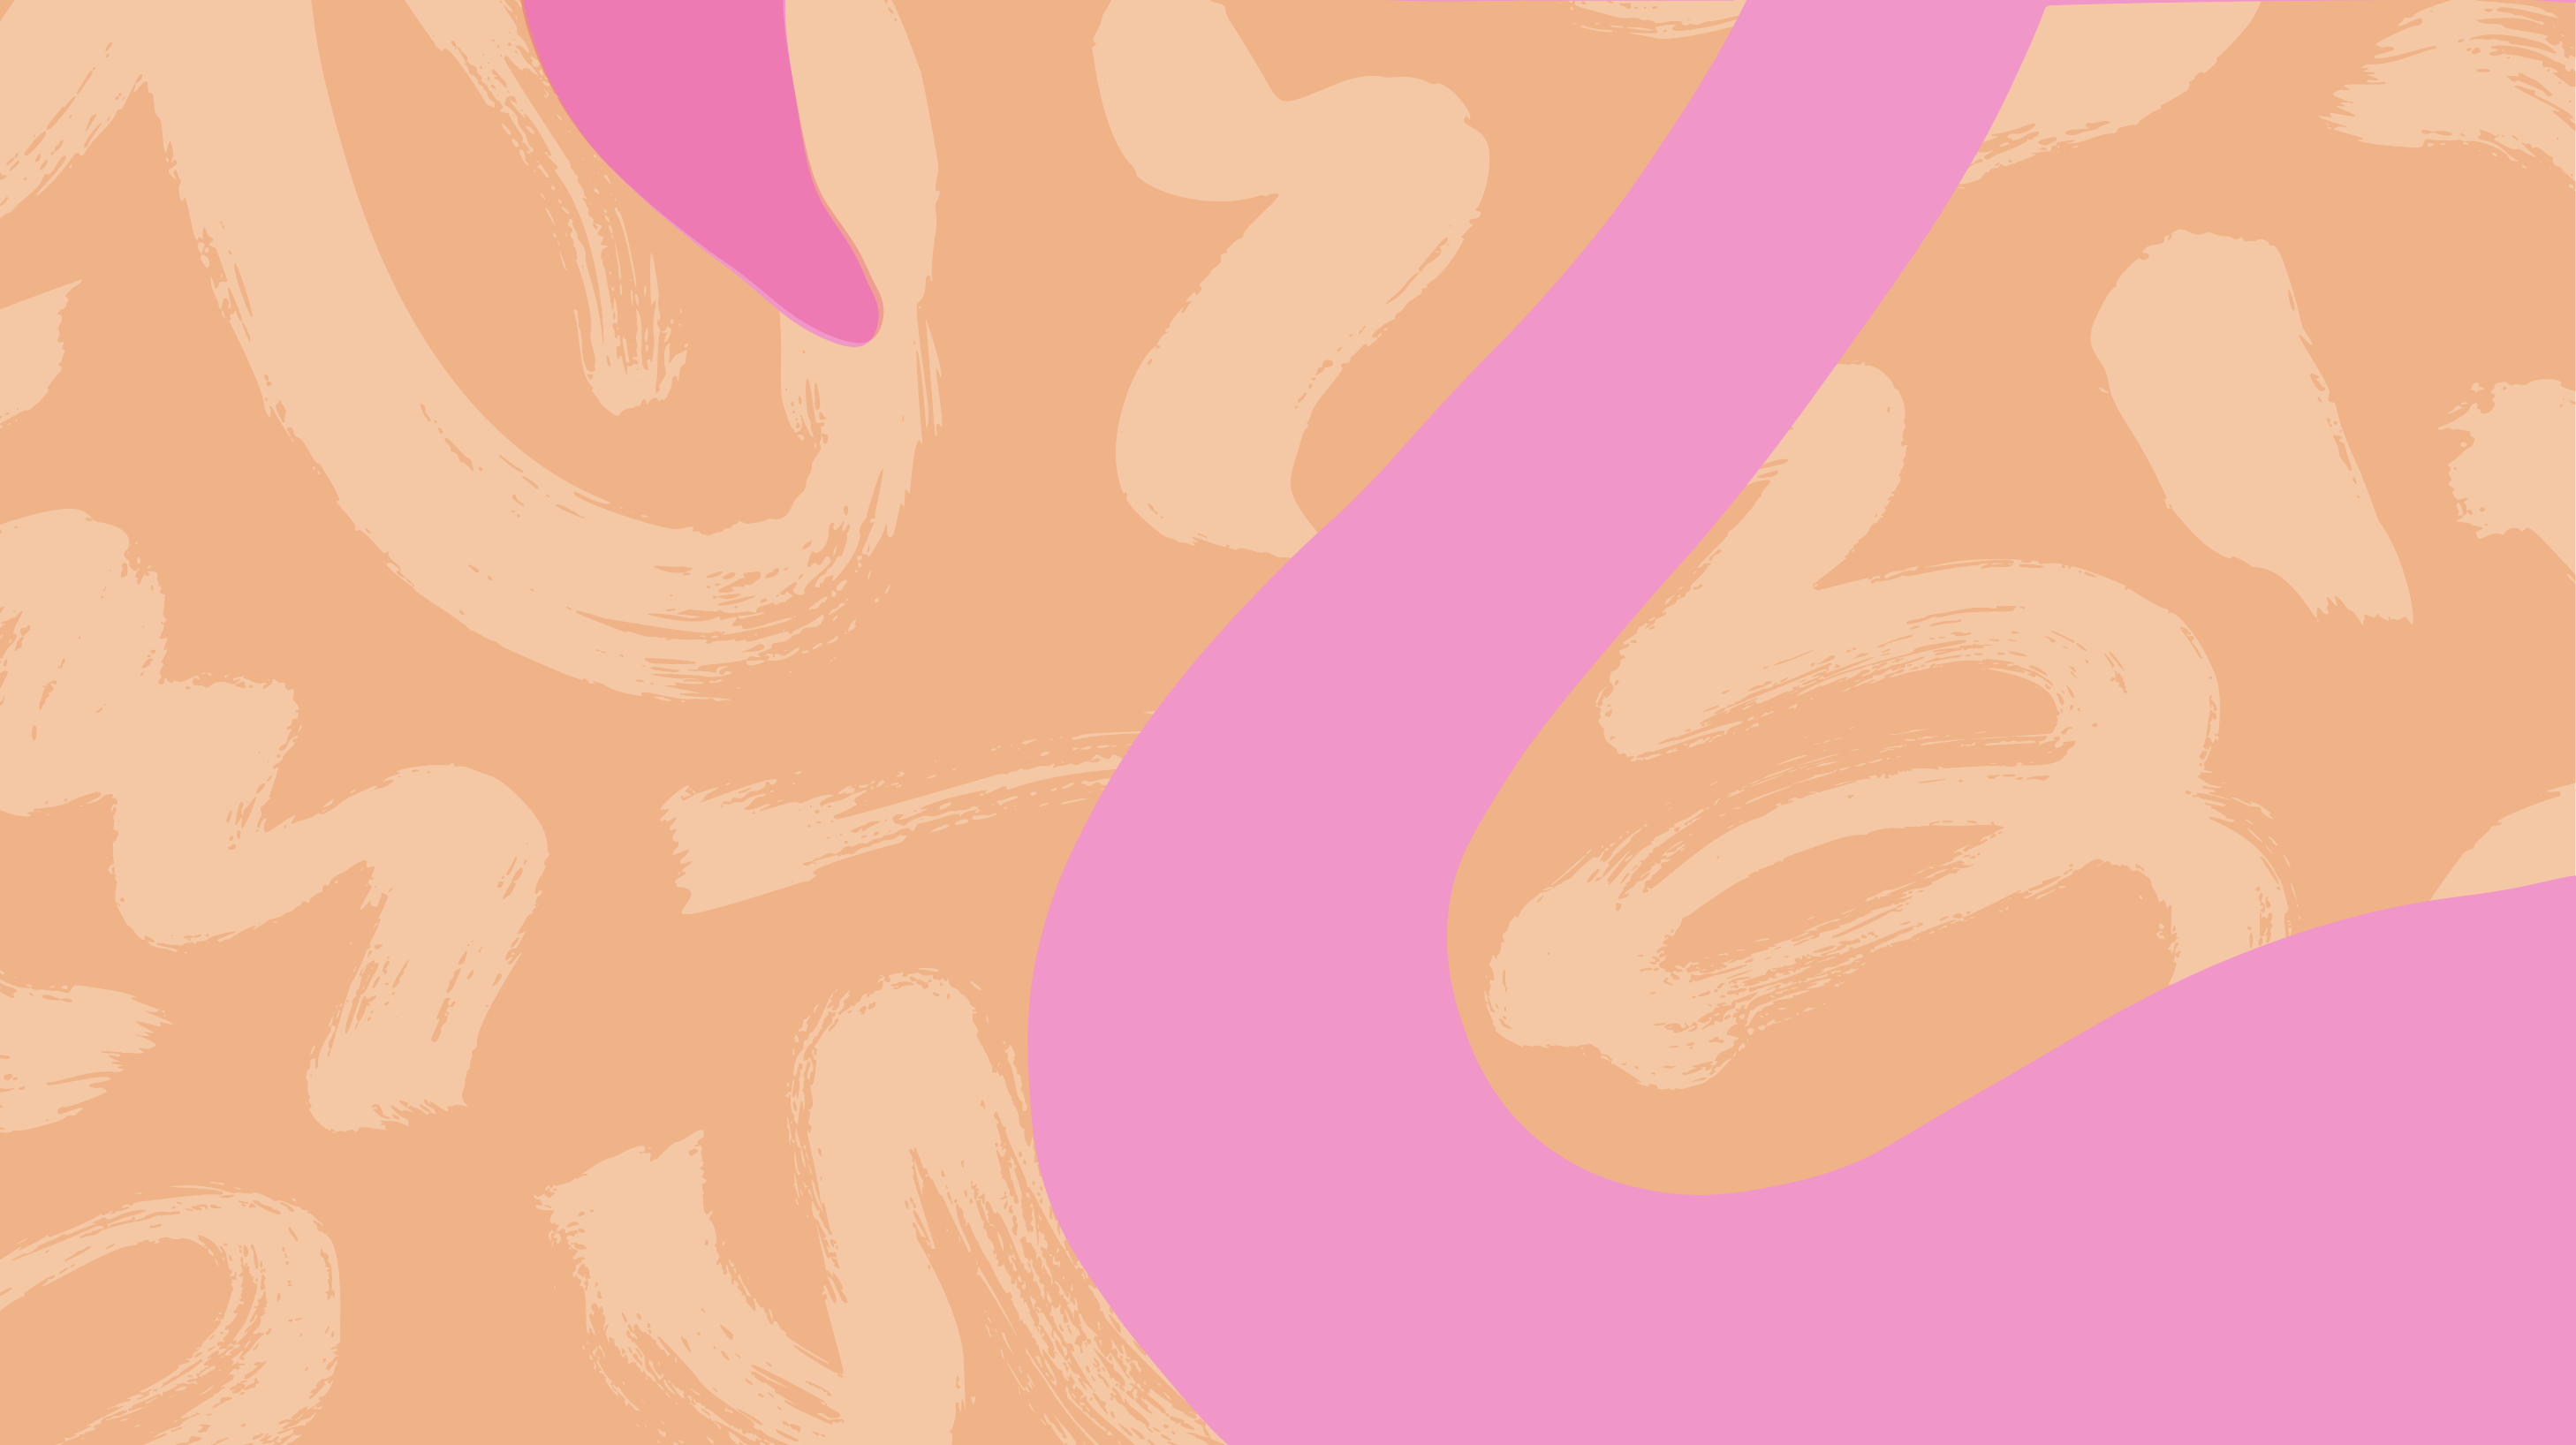 pink flamingo neck and peak with a peach and orange squiggly background